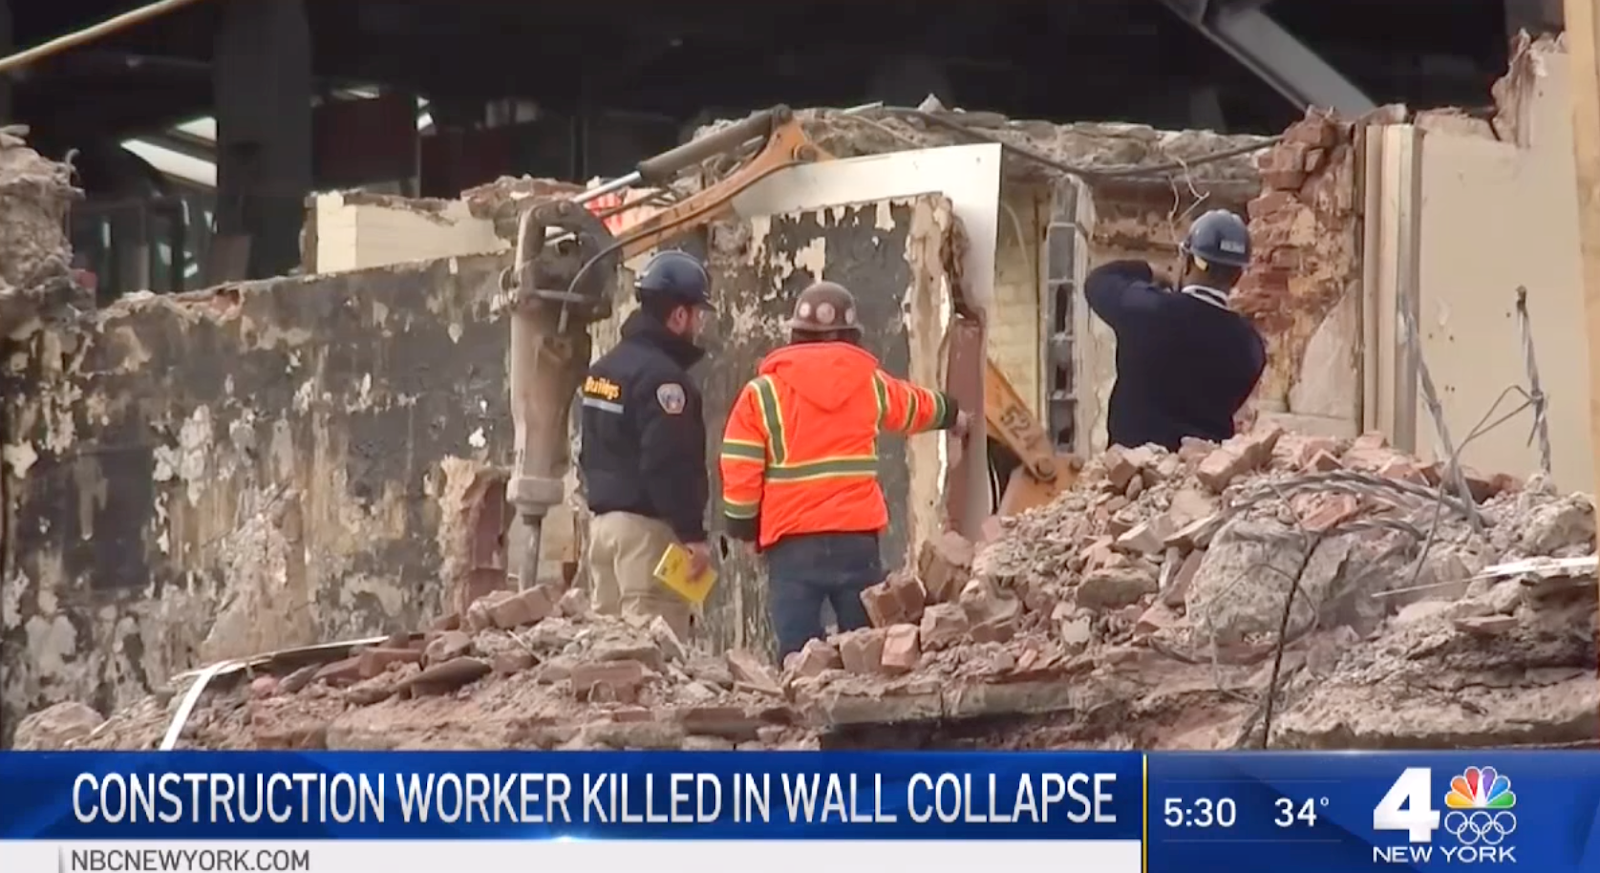 New York Construction Worker Killed in Wall Collapse